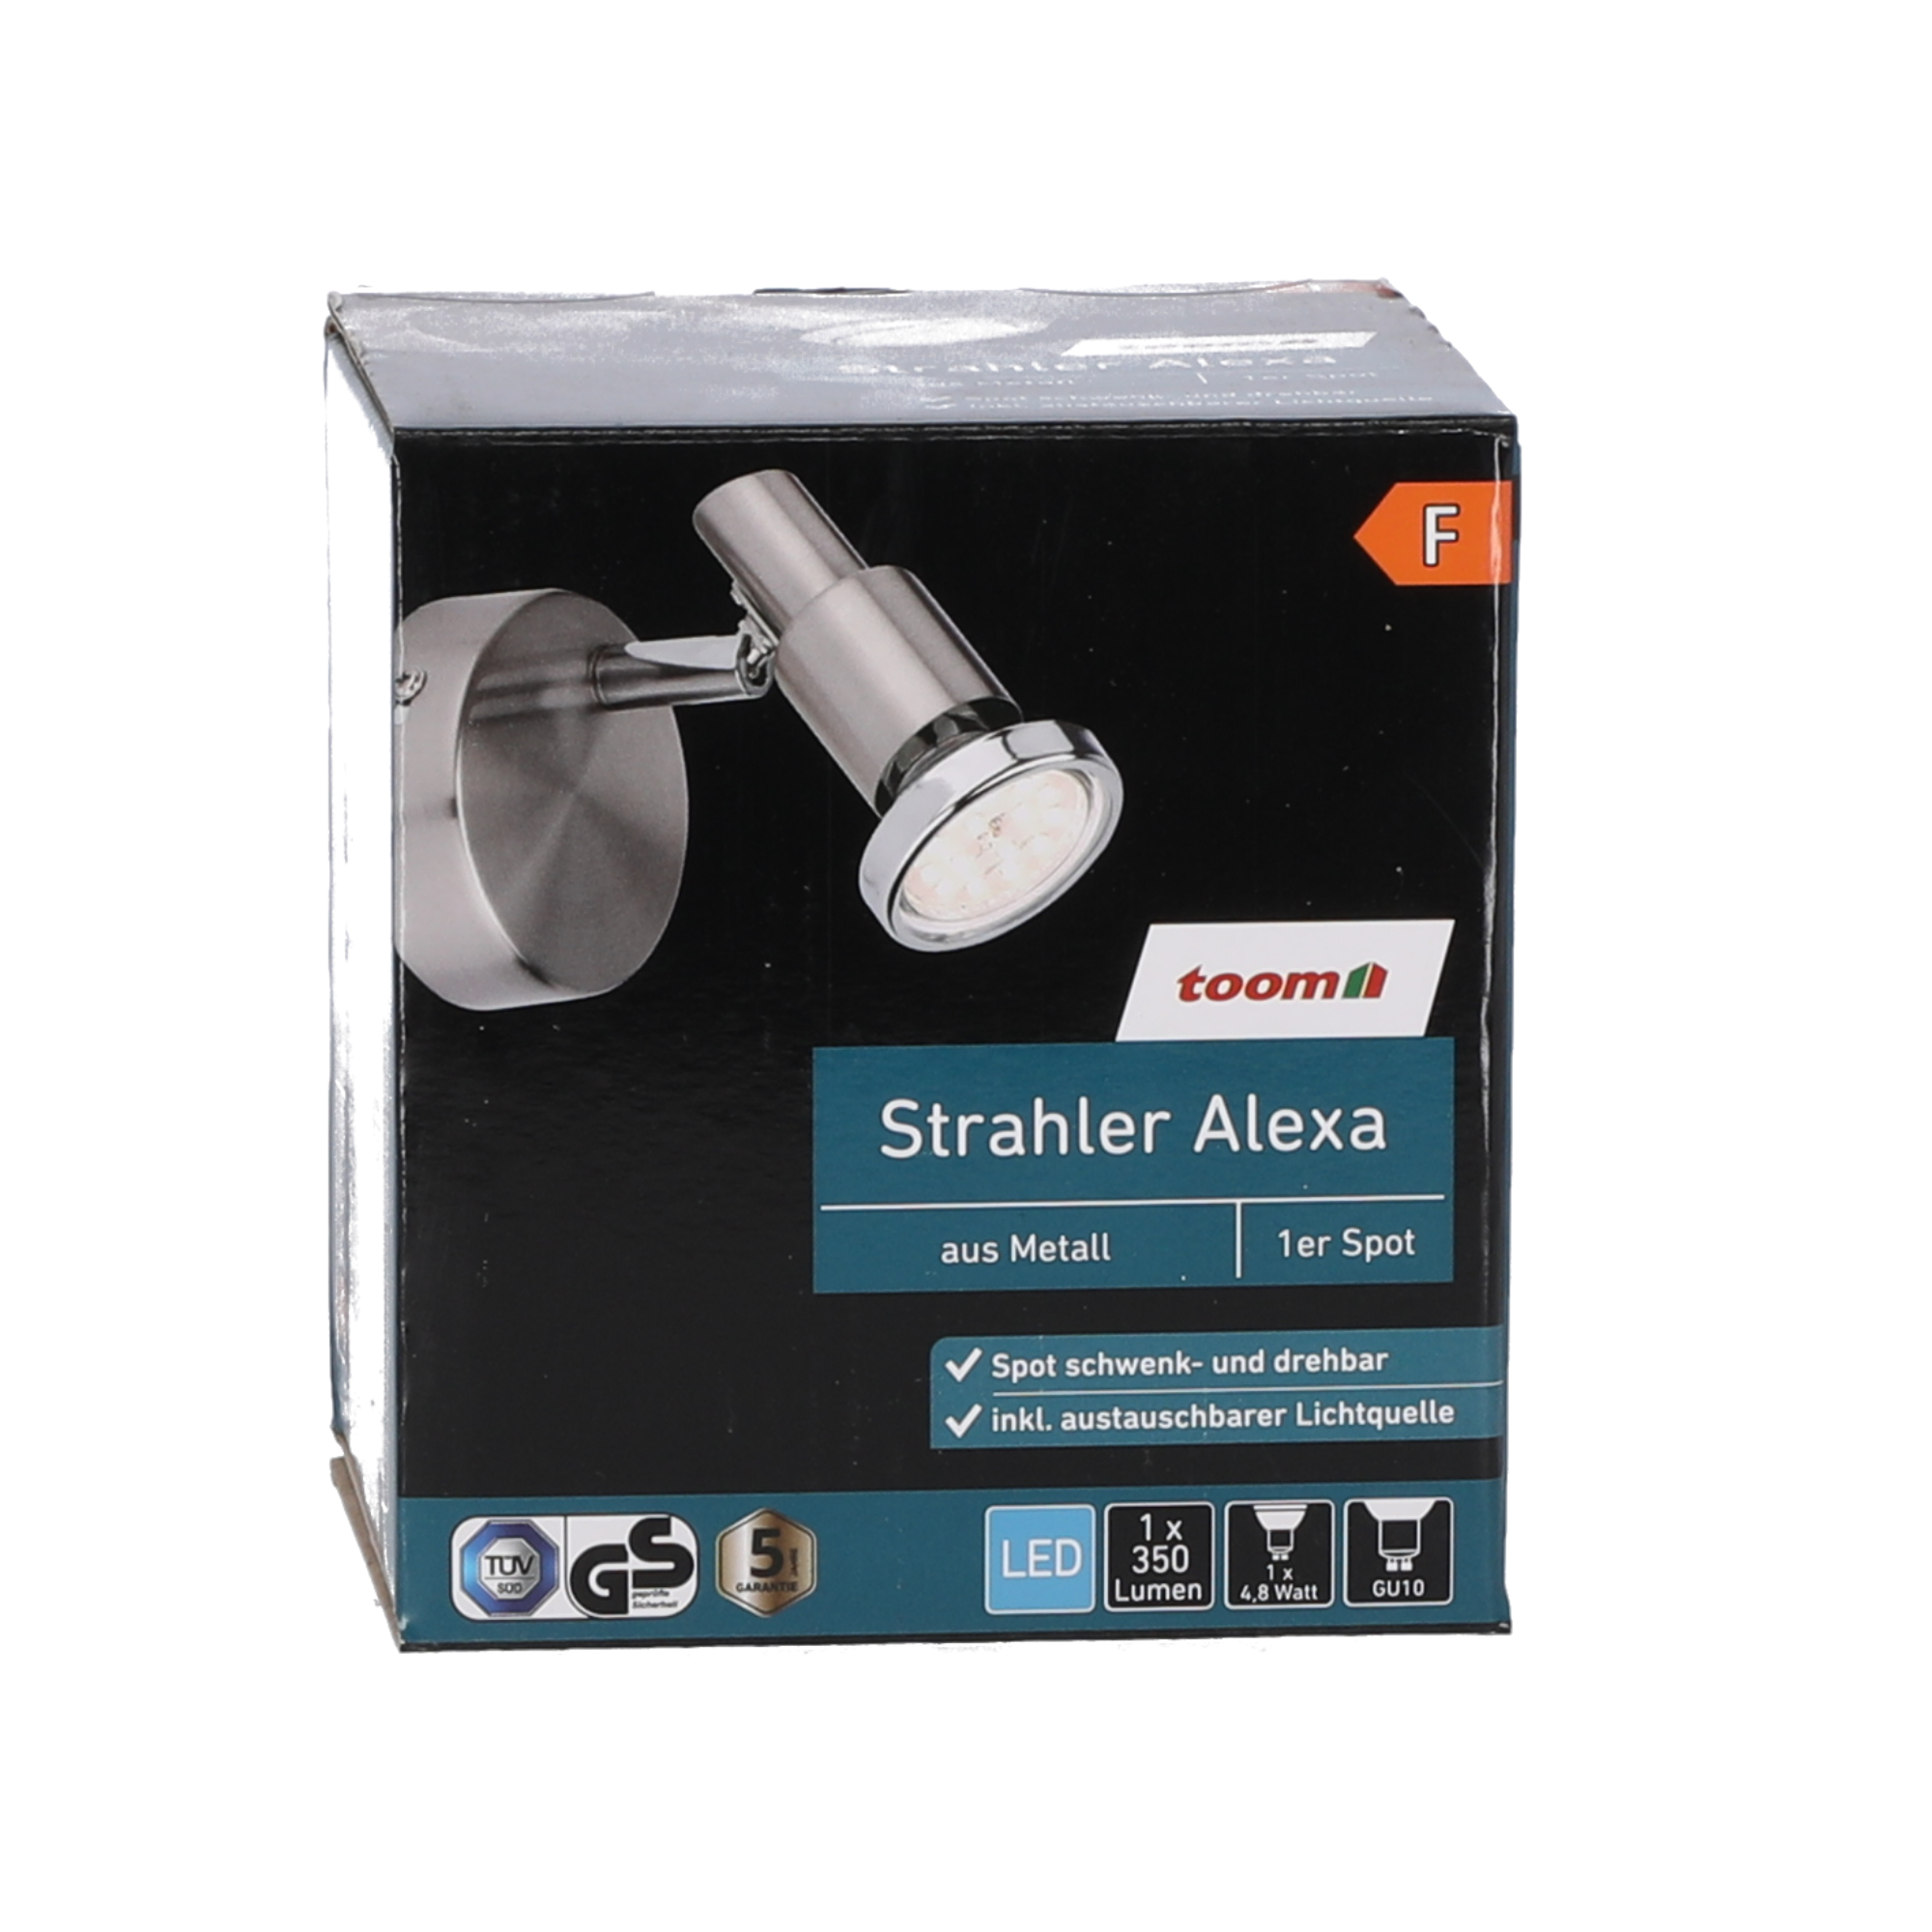 LED-Wohnraumstrahler 'Alexa' 1-flammig 350 lm + product picture